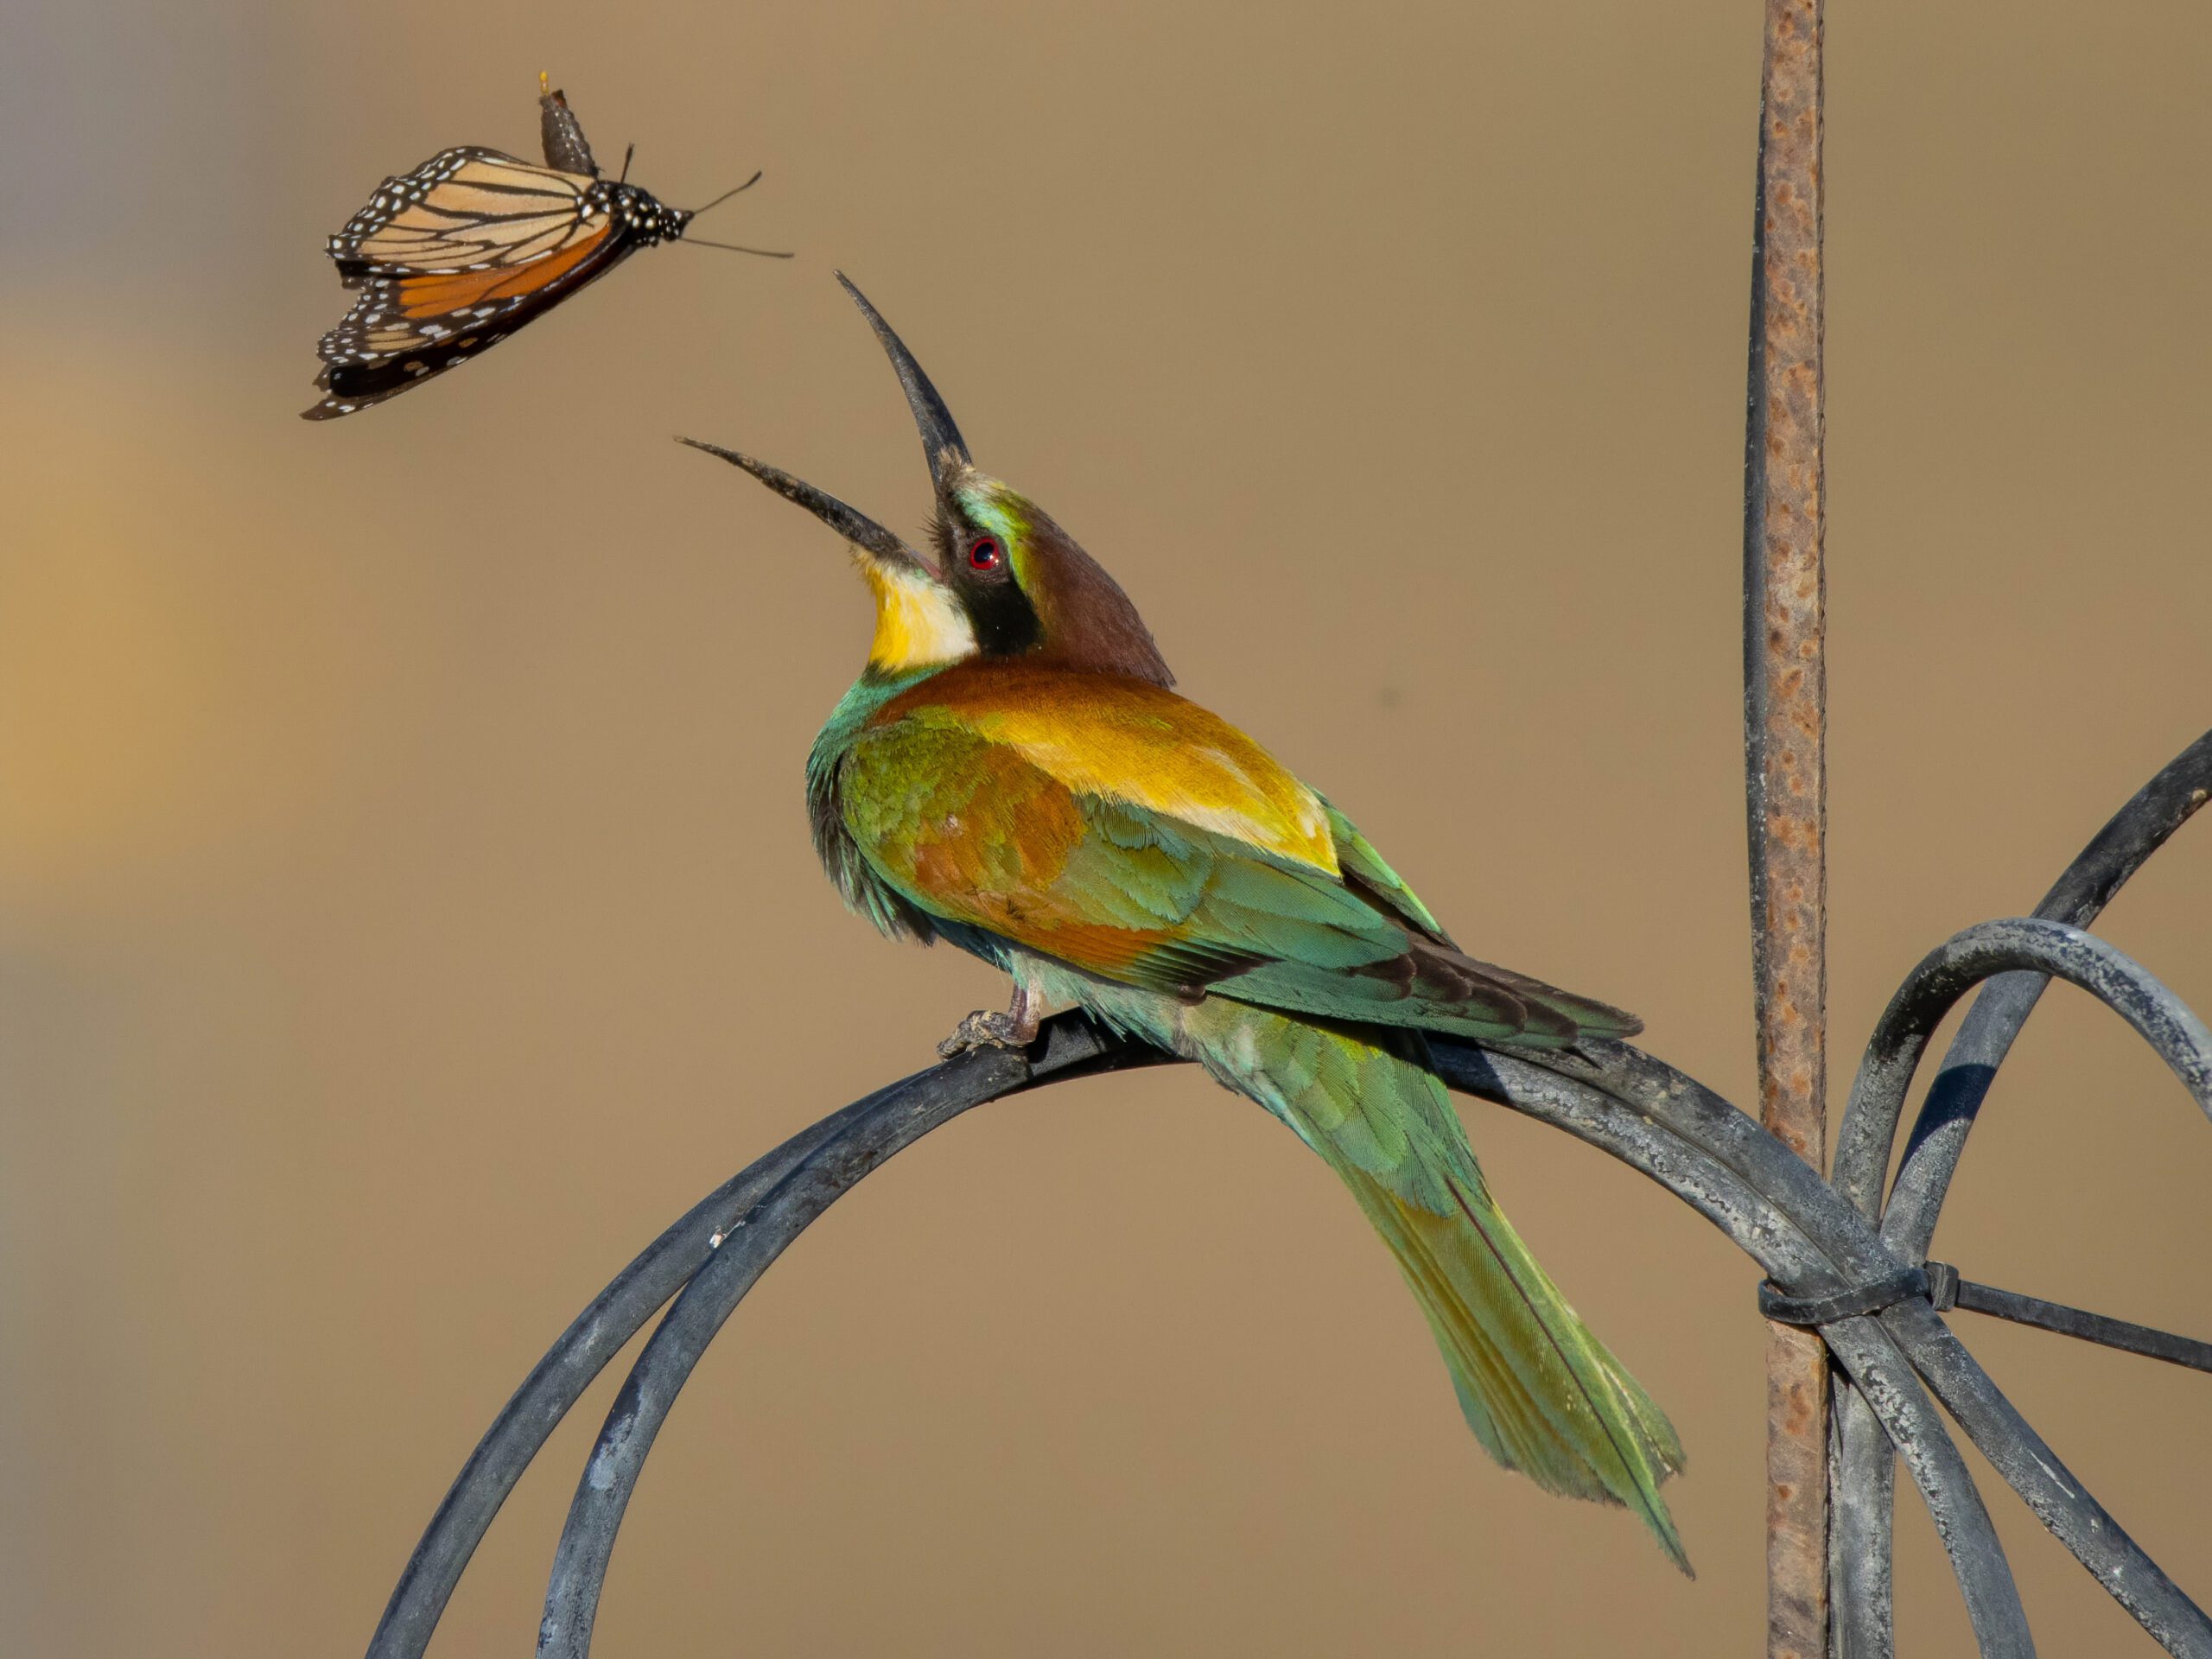 A colorful bird with green, yellow and russet-brown patterns gets ready to grab a butterlfy.